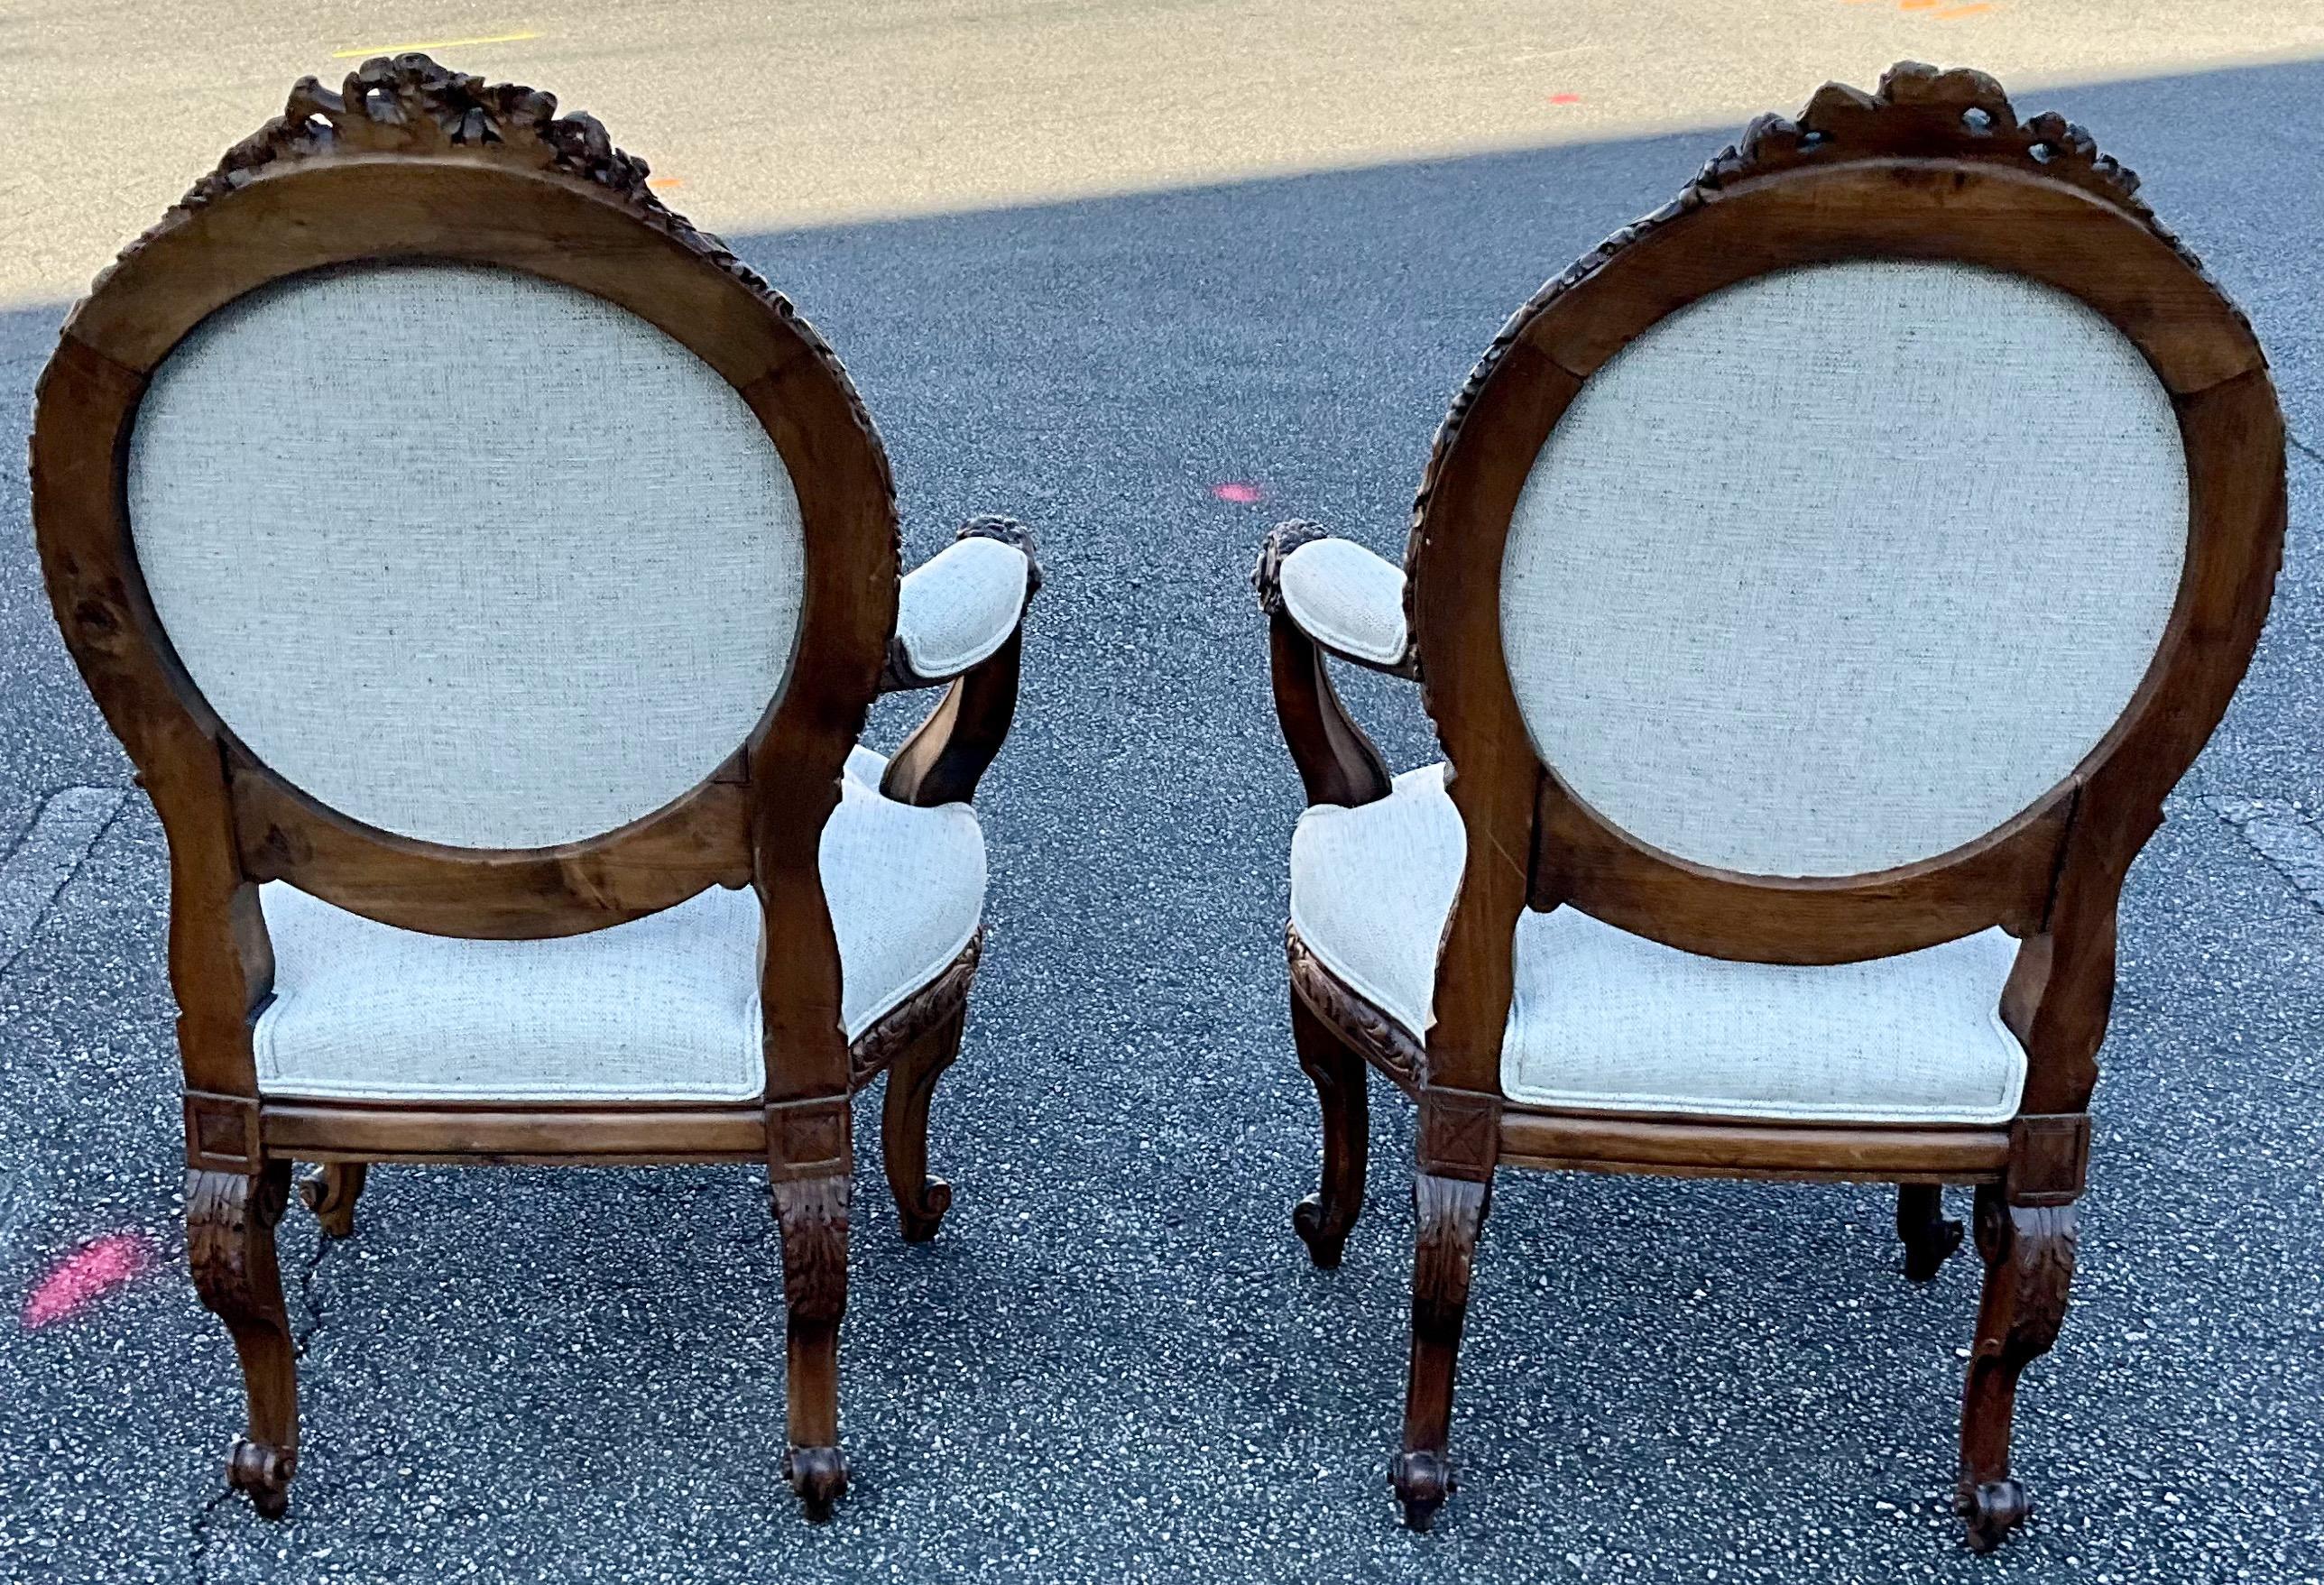 Neoclassical 19th-C. French Neo-Classical Carved Walnut Bergere Chairs with Rams, Pair For Sale